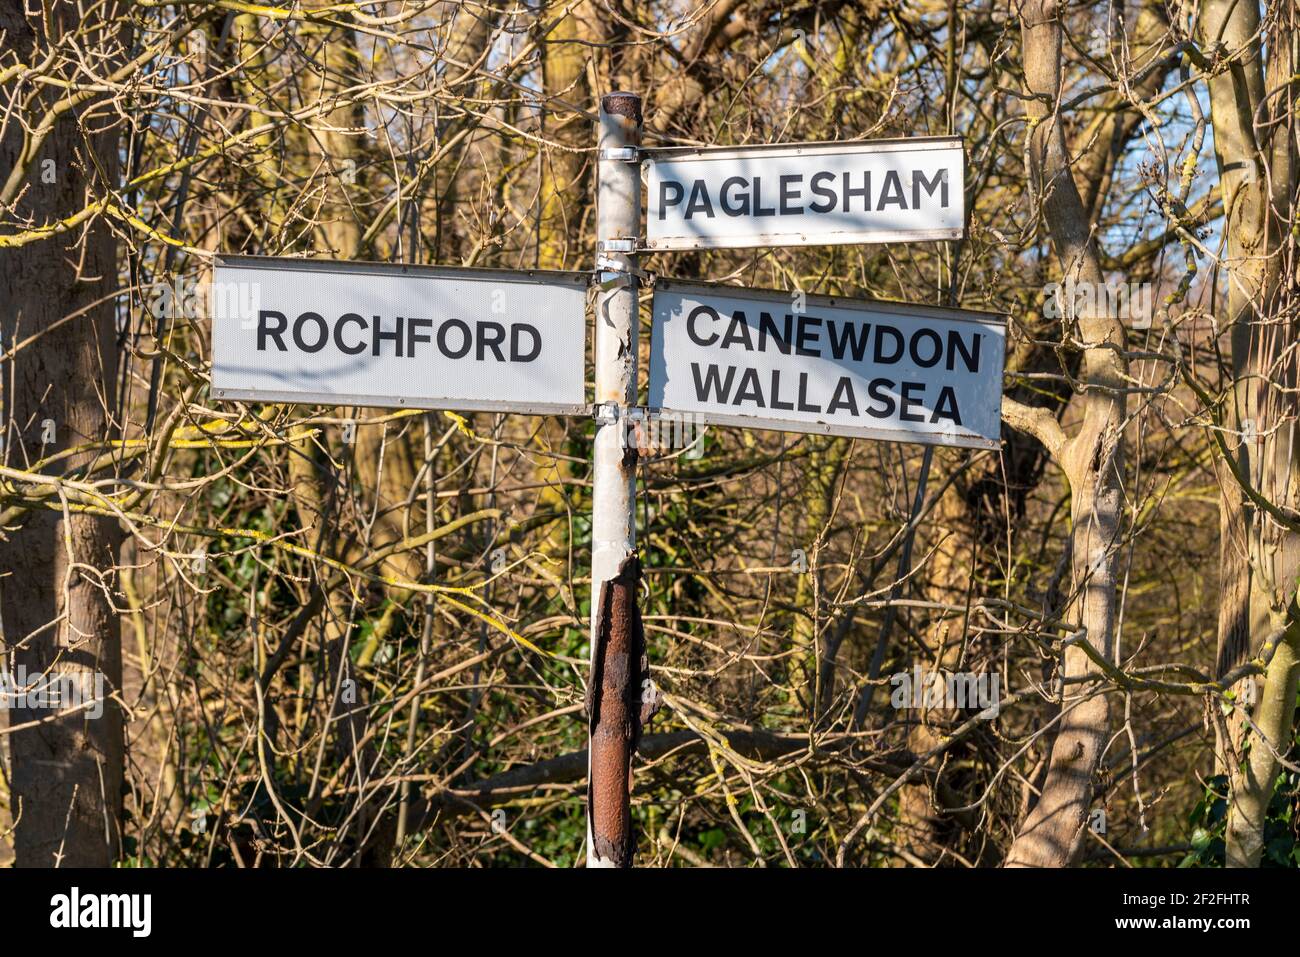 Old road destination sign in Ballards Gore, Stambridge, Essex, UK, with routes to Rochford, Paglesham, Canewdon and Wallasea. Woodland, rural places Stock Photo